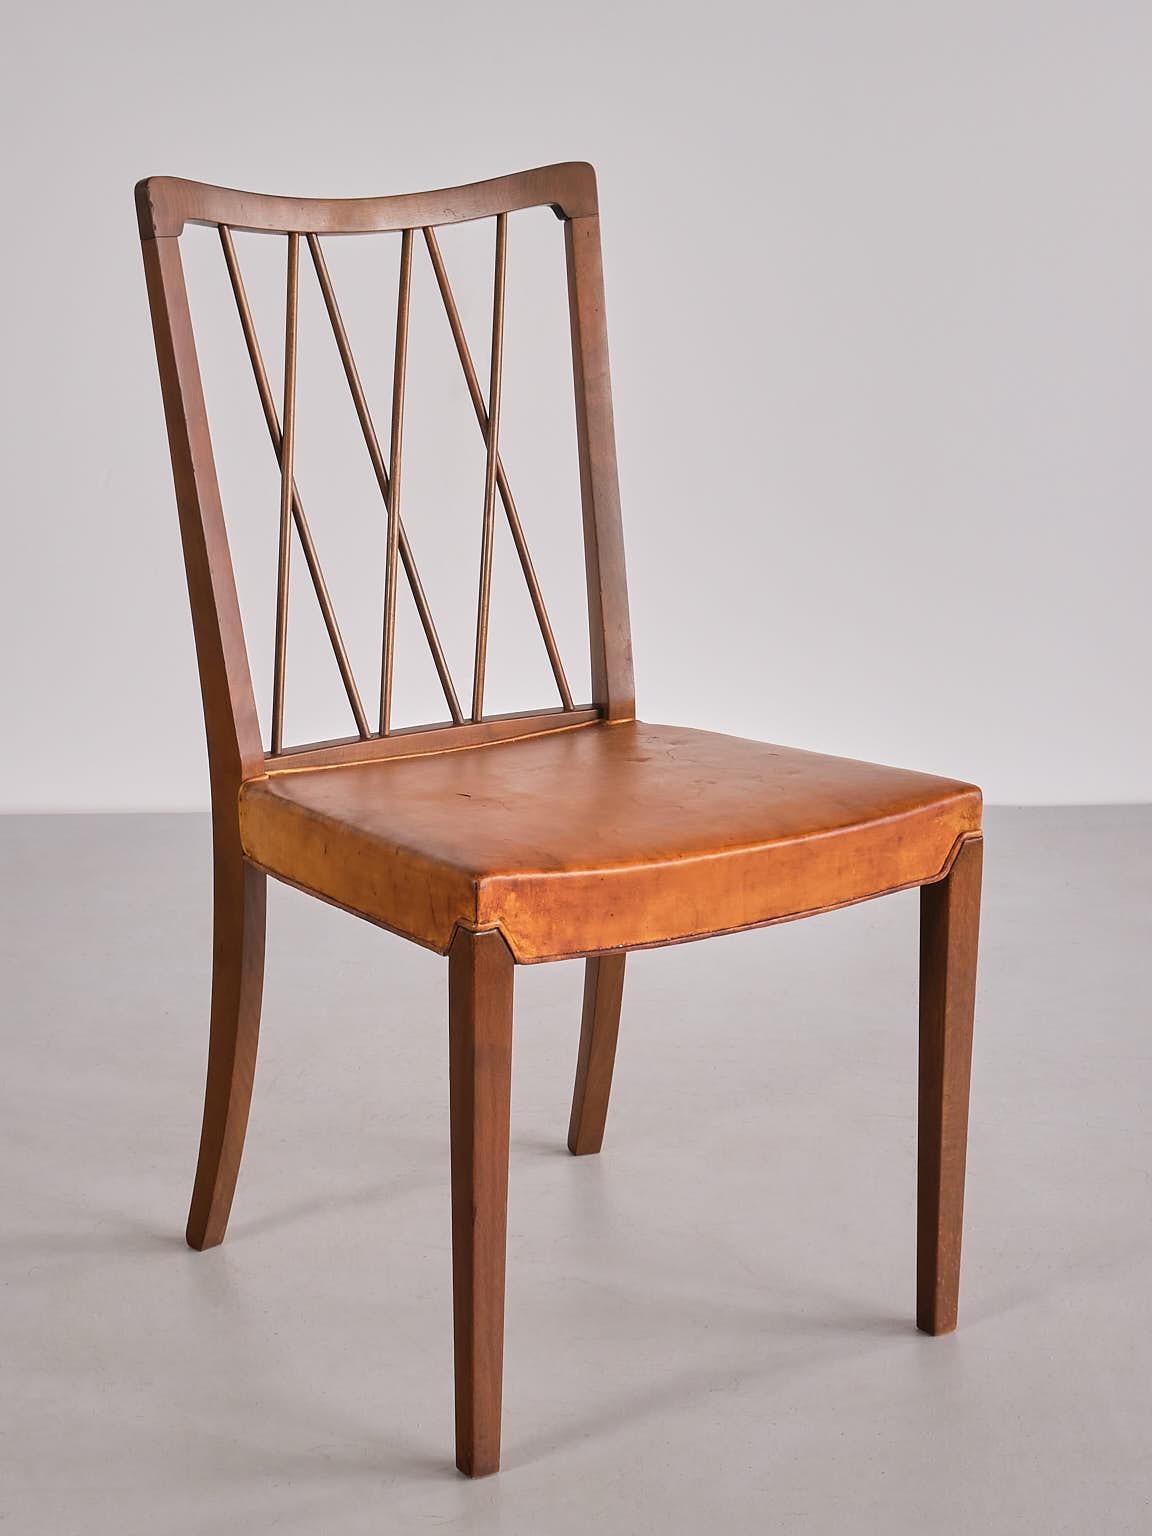 Set of Eight Frode Holm Dining Chairs, Walnut and Leather, Illum, Denmark, 1940s For Sale 4